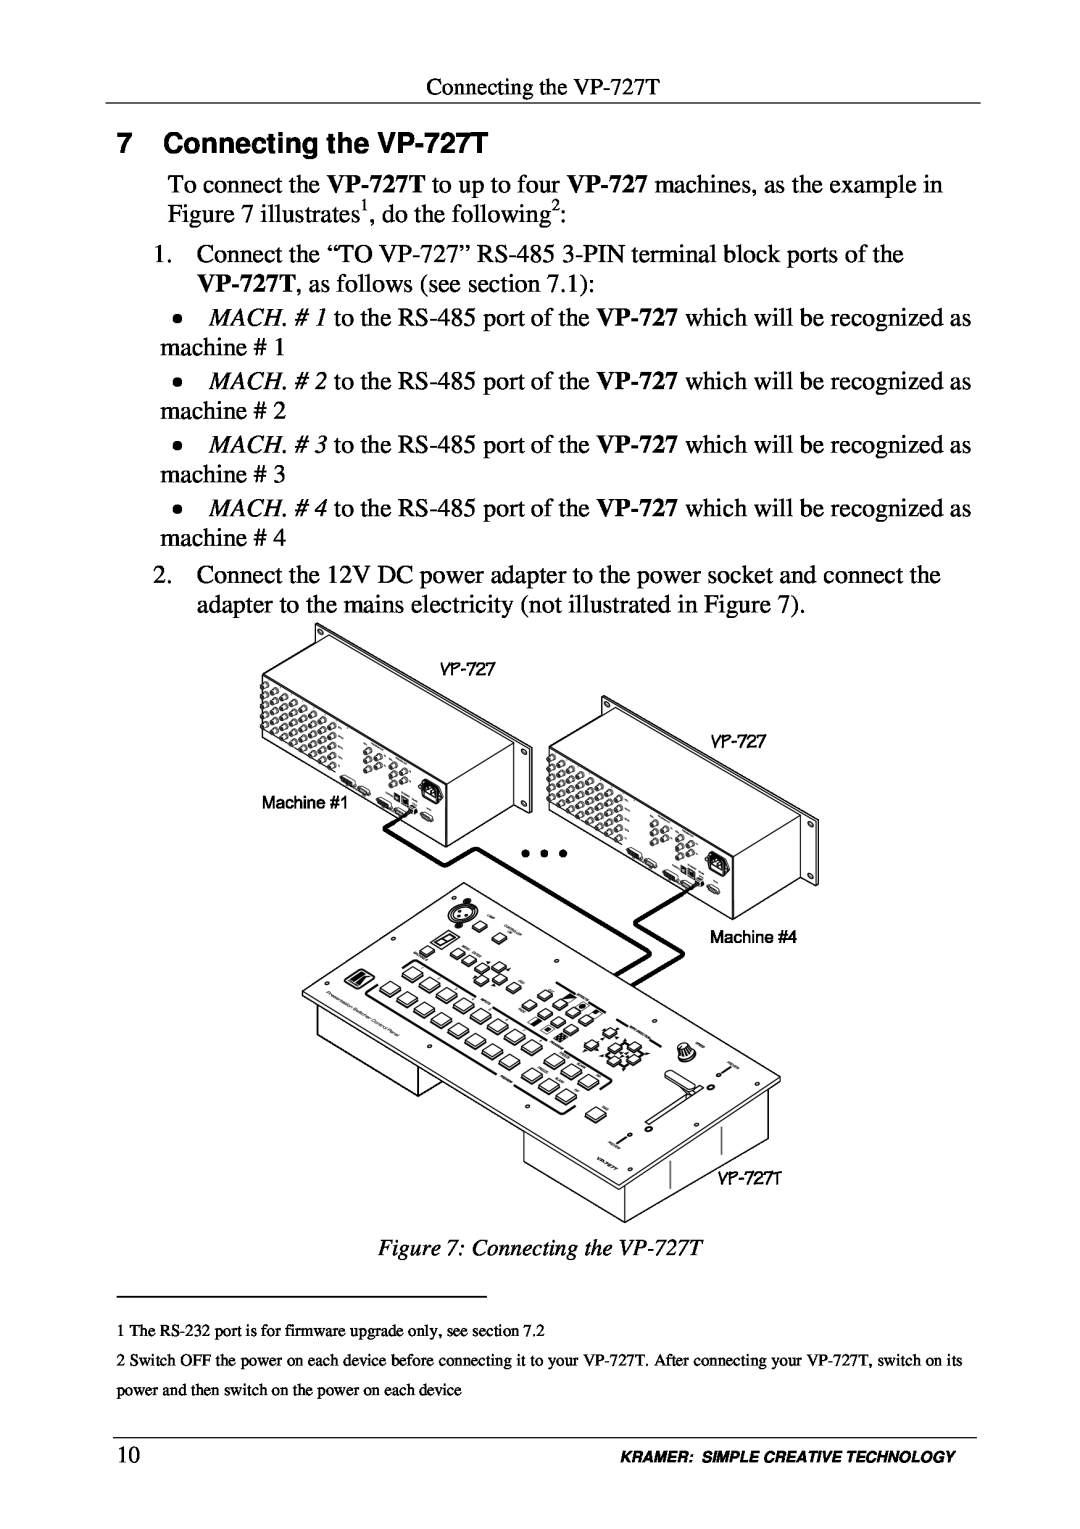 Kramer Electronics user manual Connecting the VP-727T 